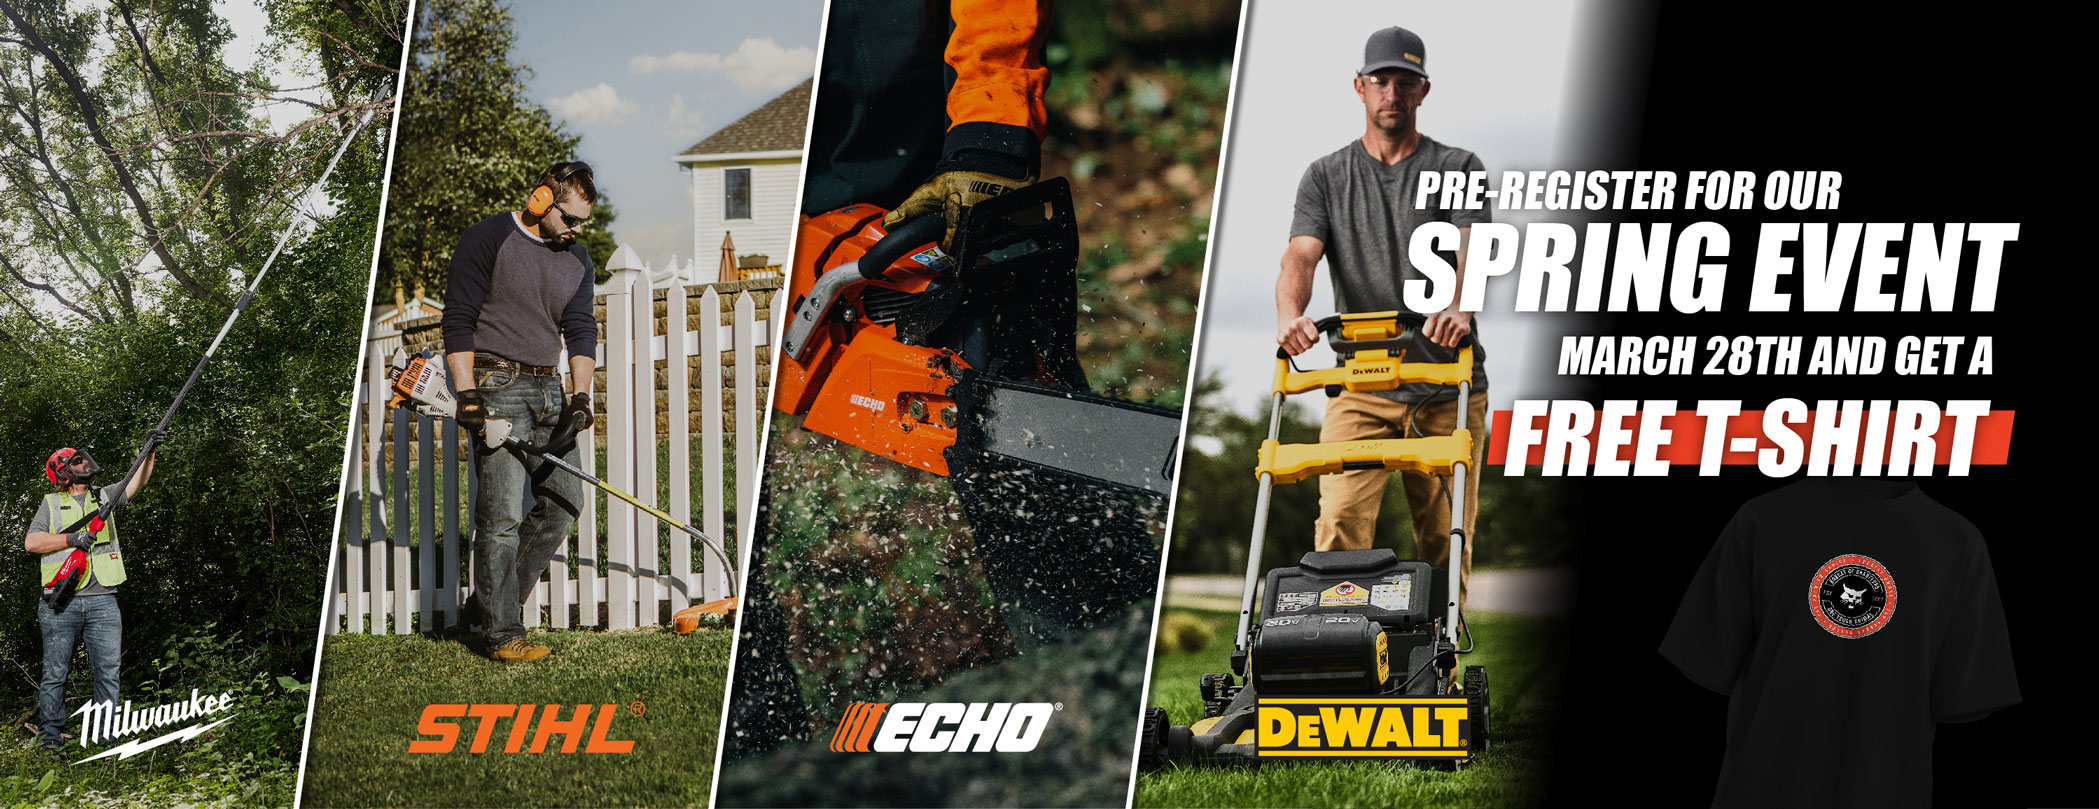 Echo, Stihl, Milwaukee and Dewalt products for the Bobcat Spring Sale on March 27th